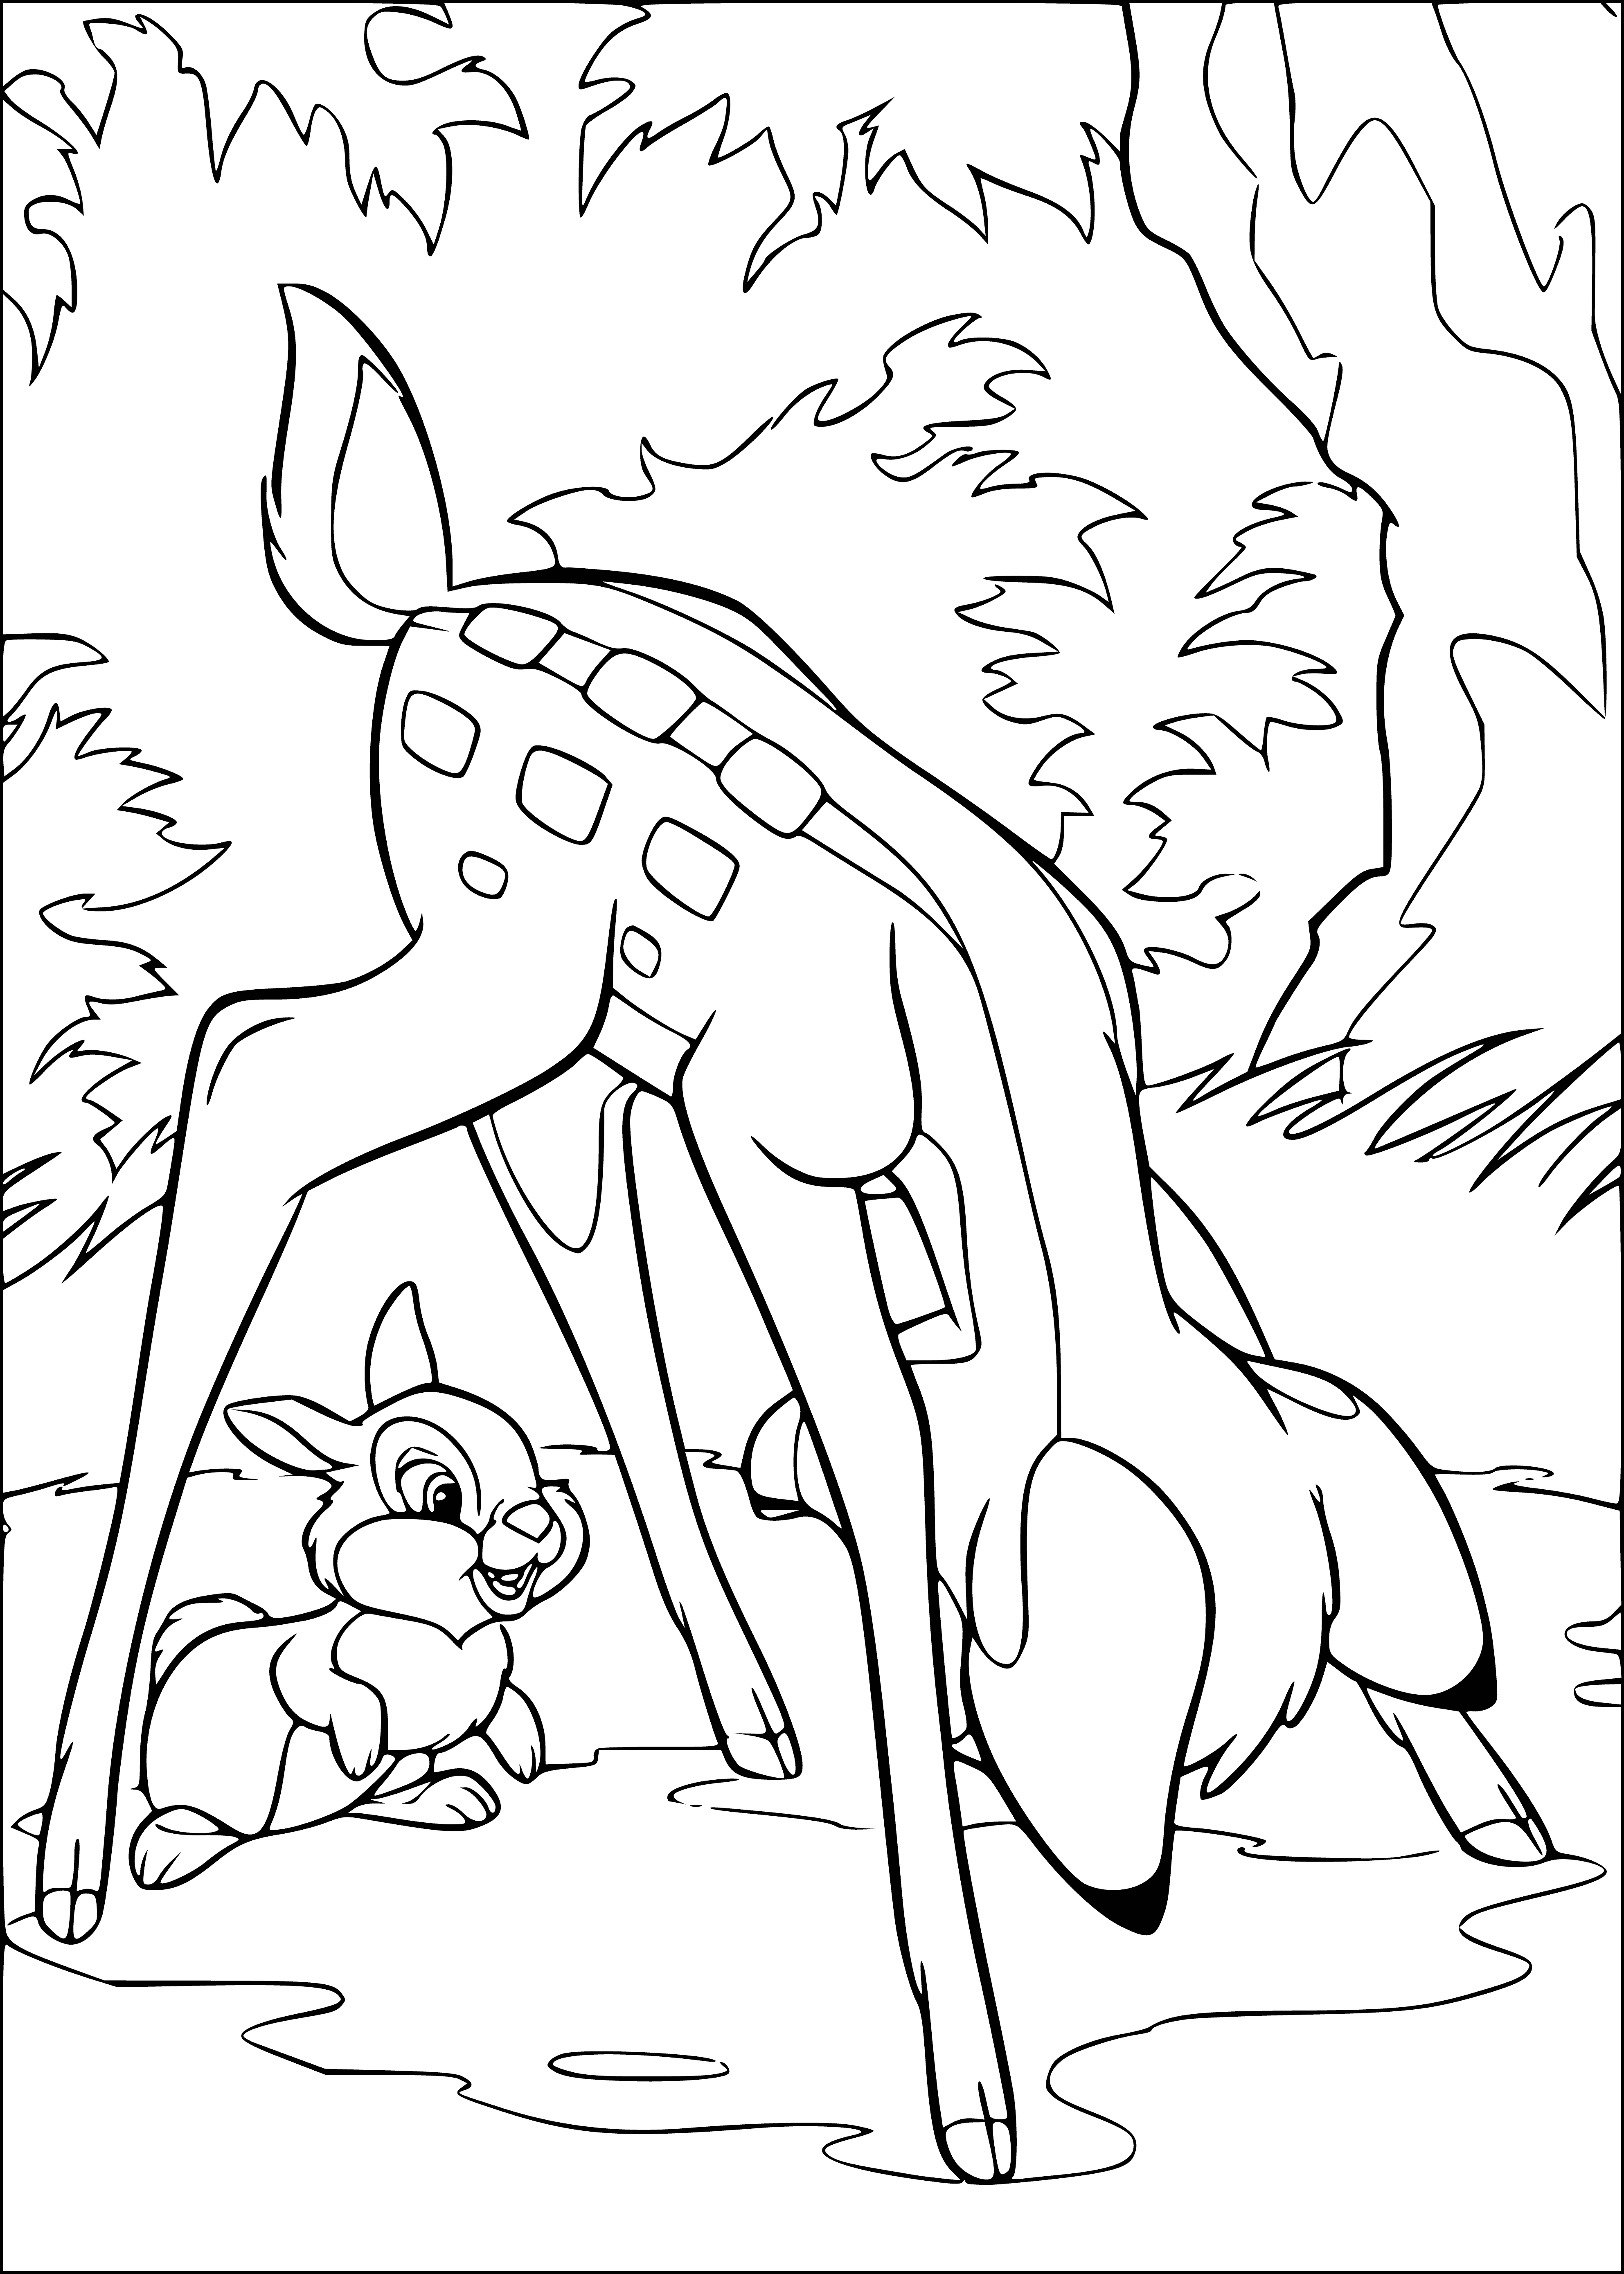 Hare and Bambi coloring page